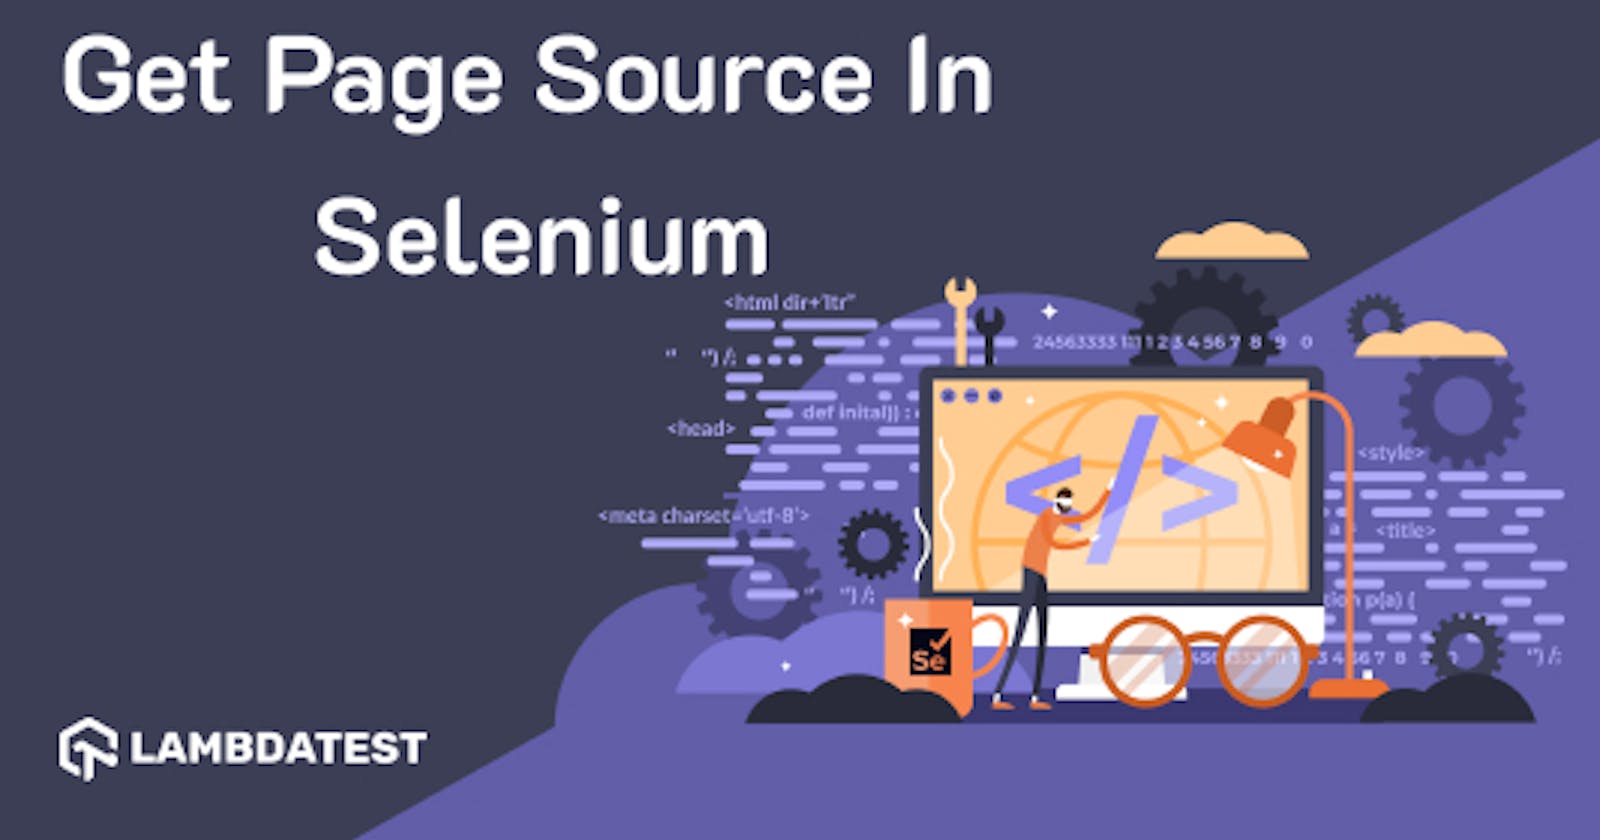 How To Get Page Source In Selenium Using Python?